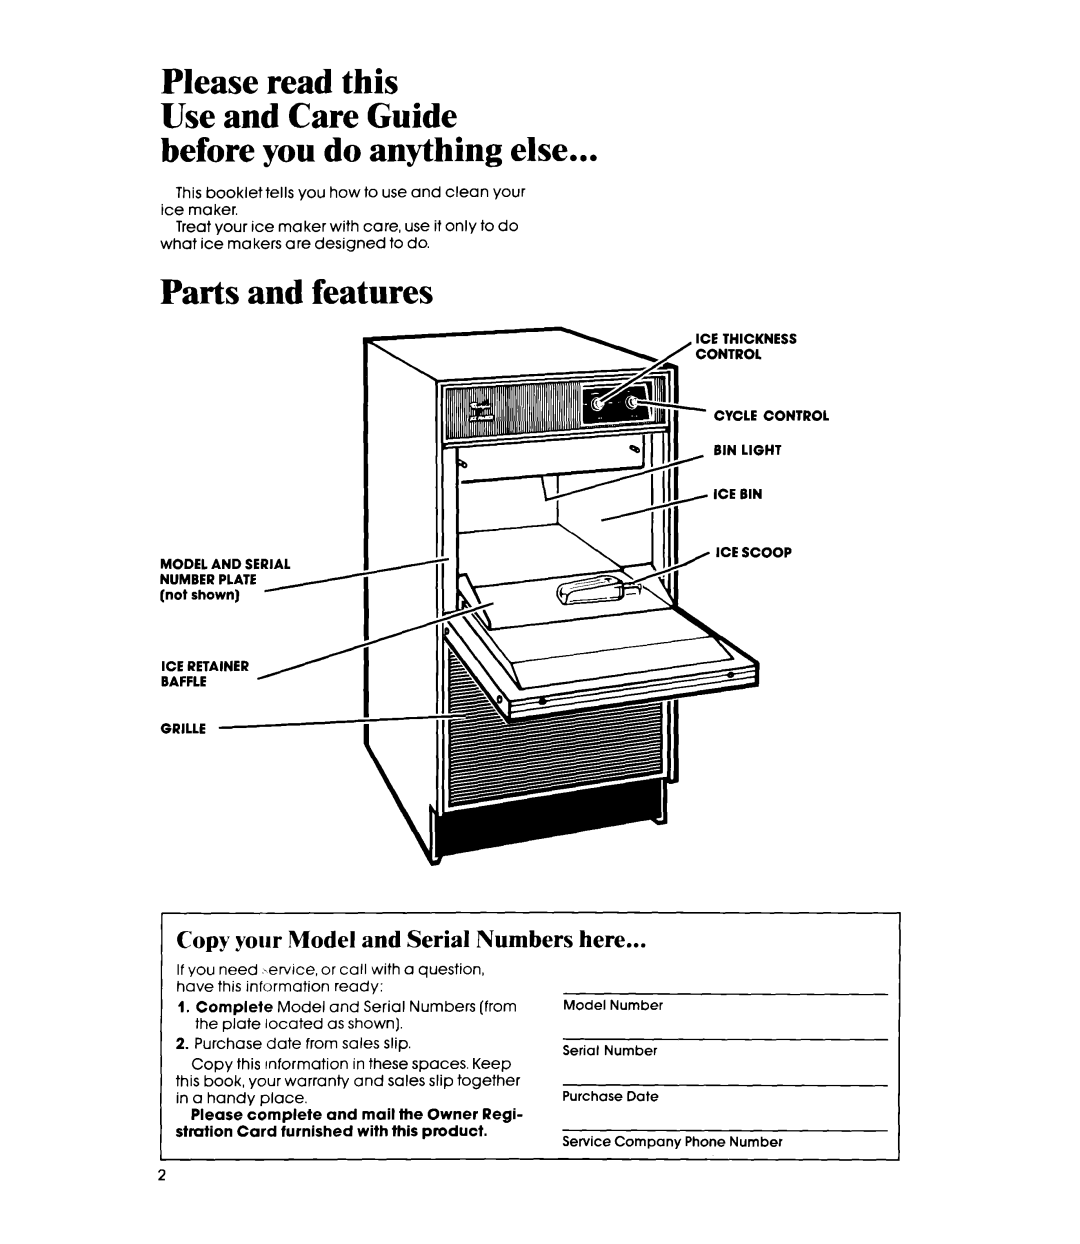 Whirlpool EC5100 manual before you do anything else, Parts and features, Copy your Model and Serial Numbers here 